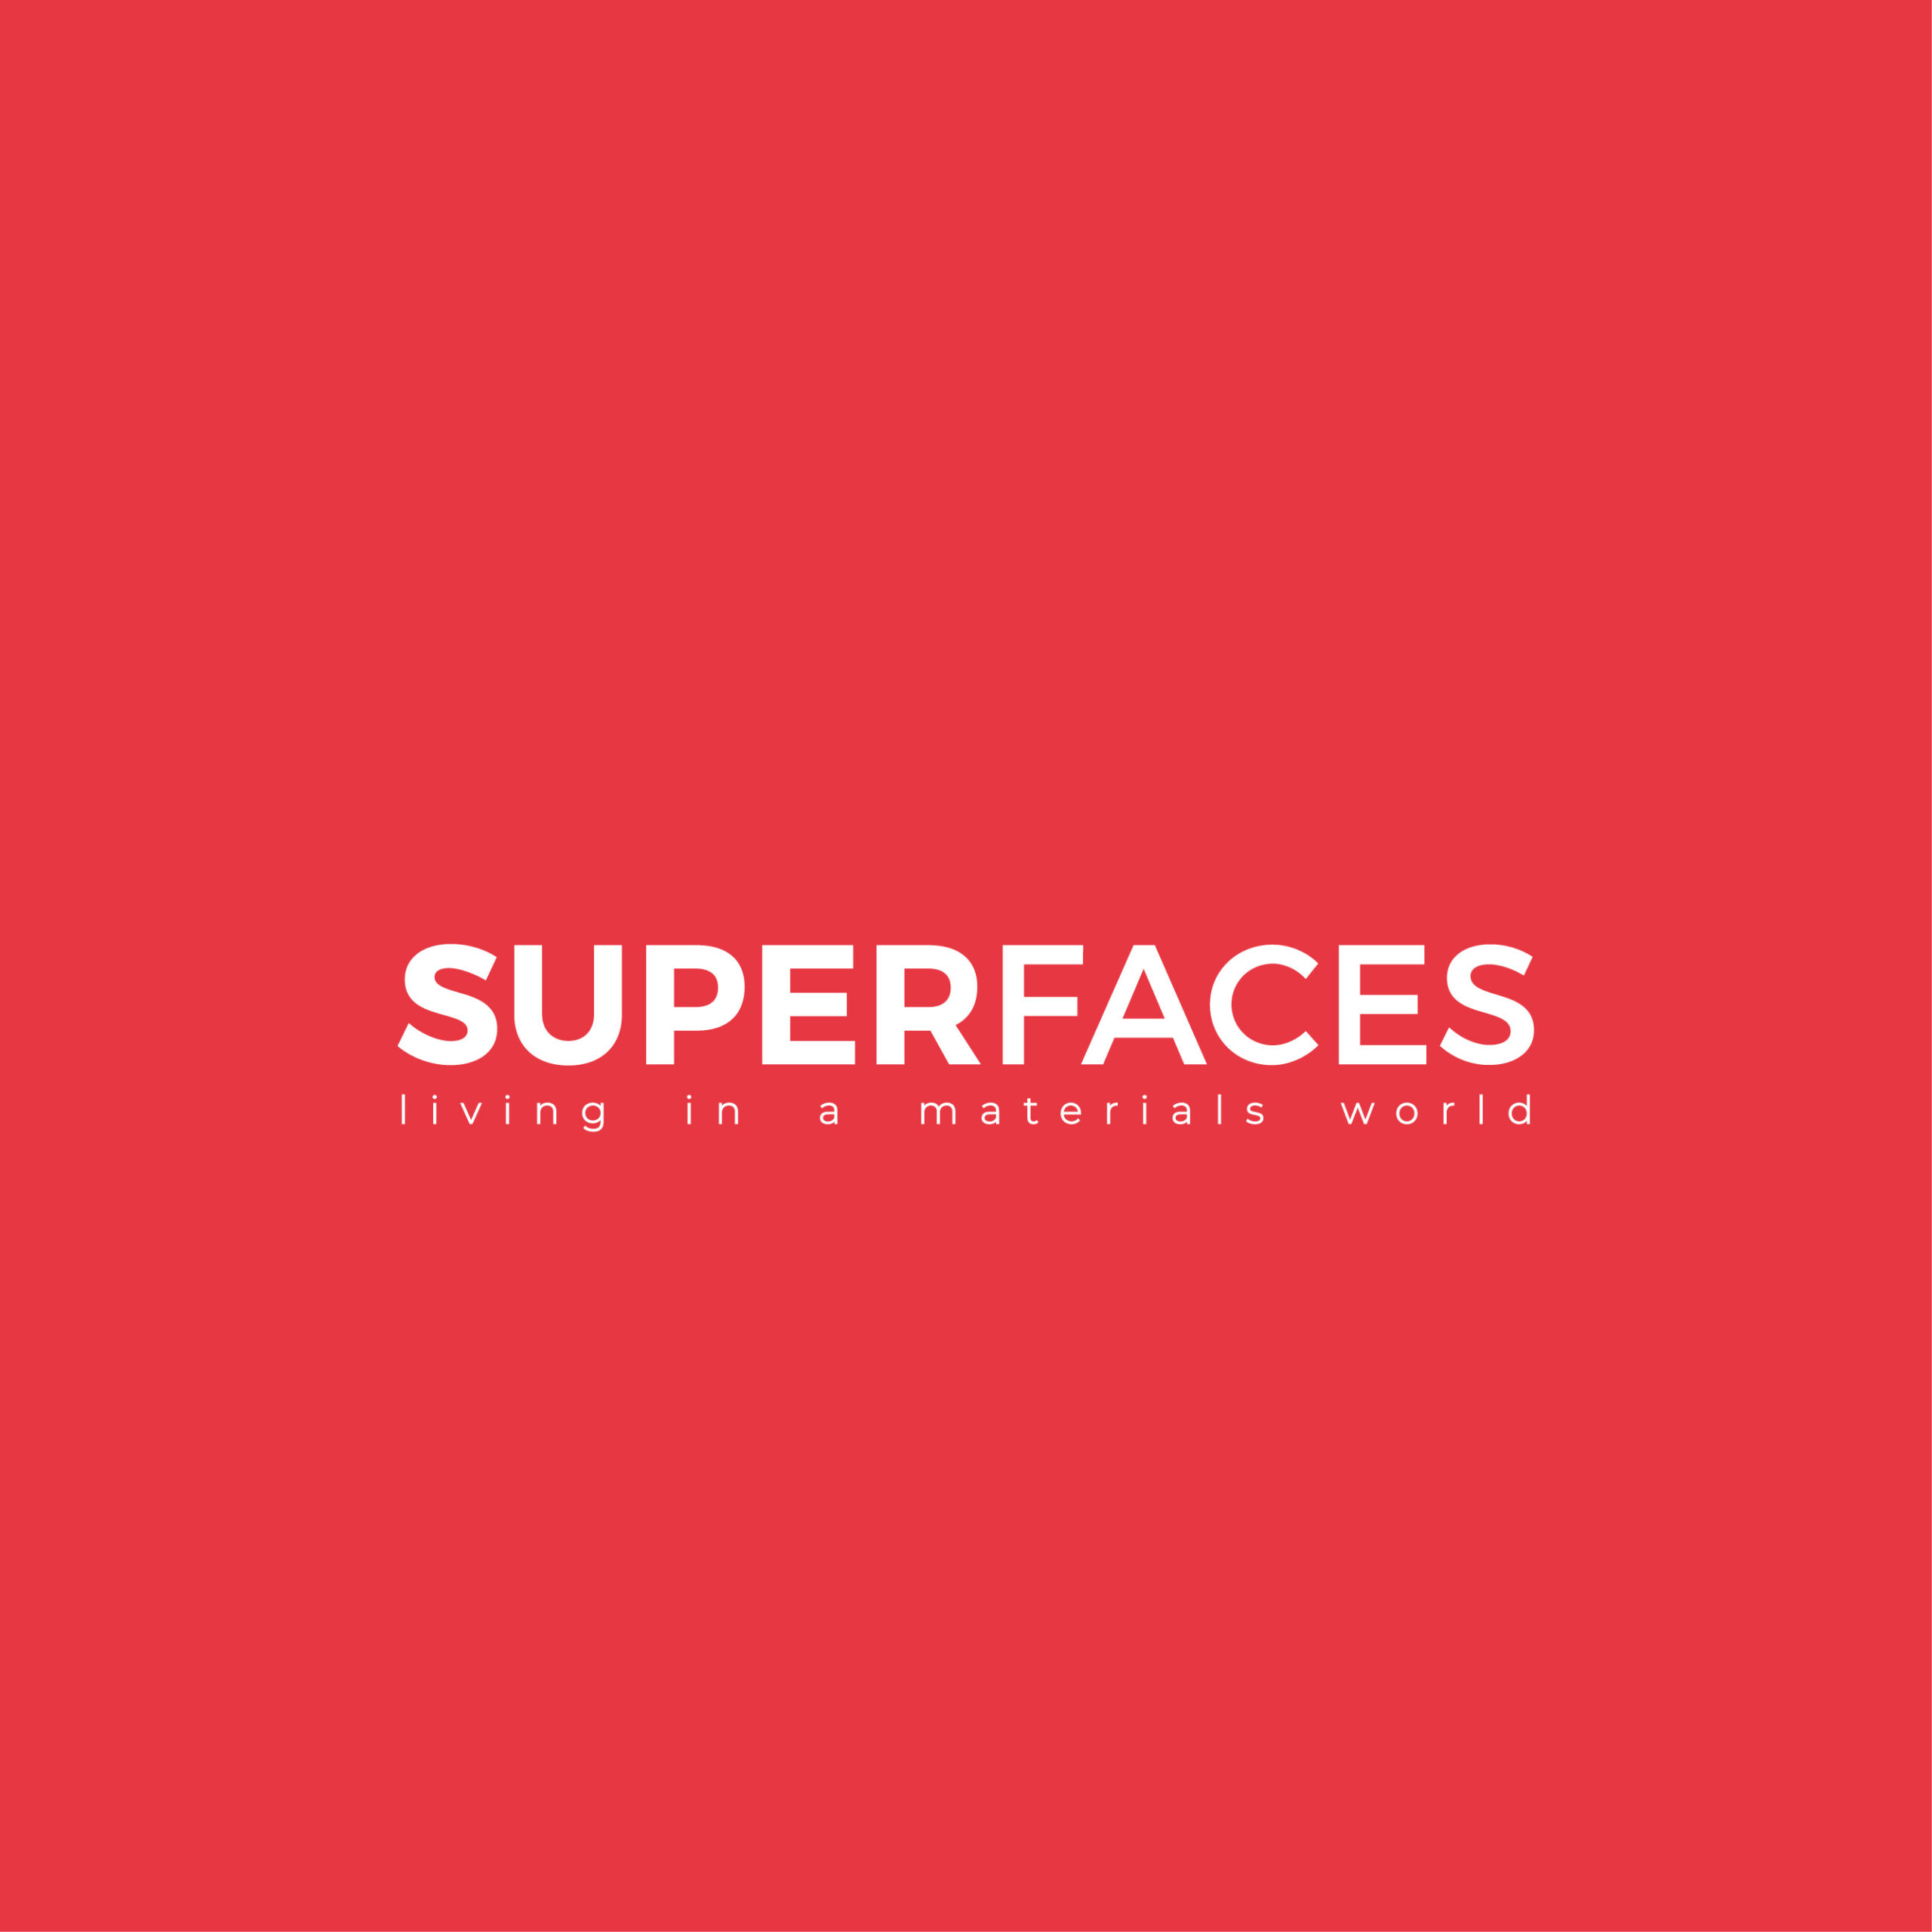 Superfaces